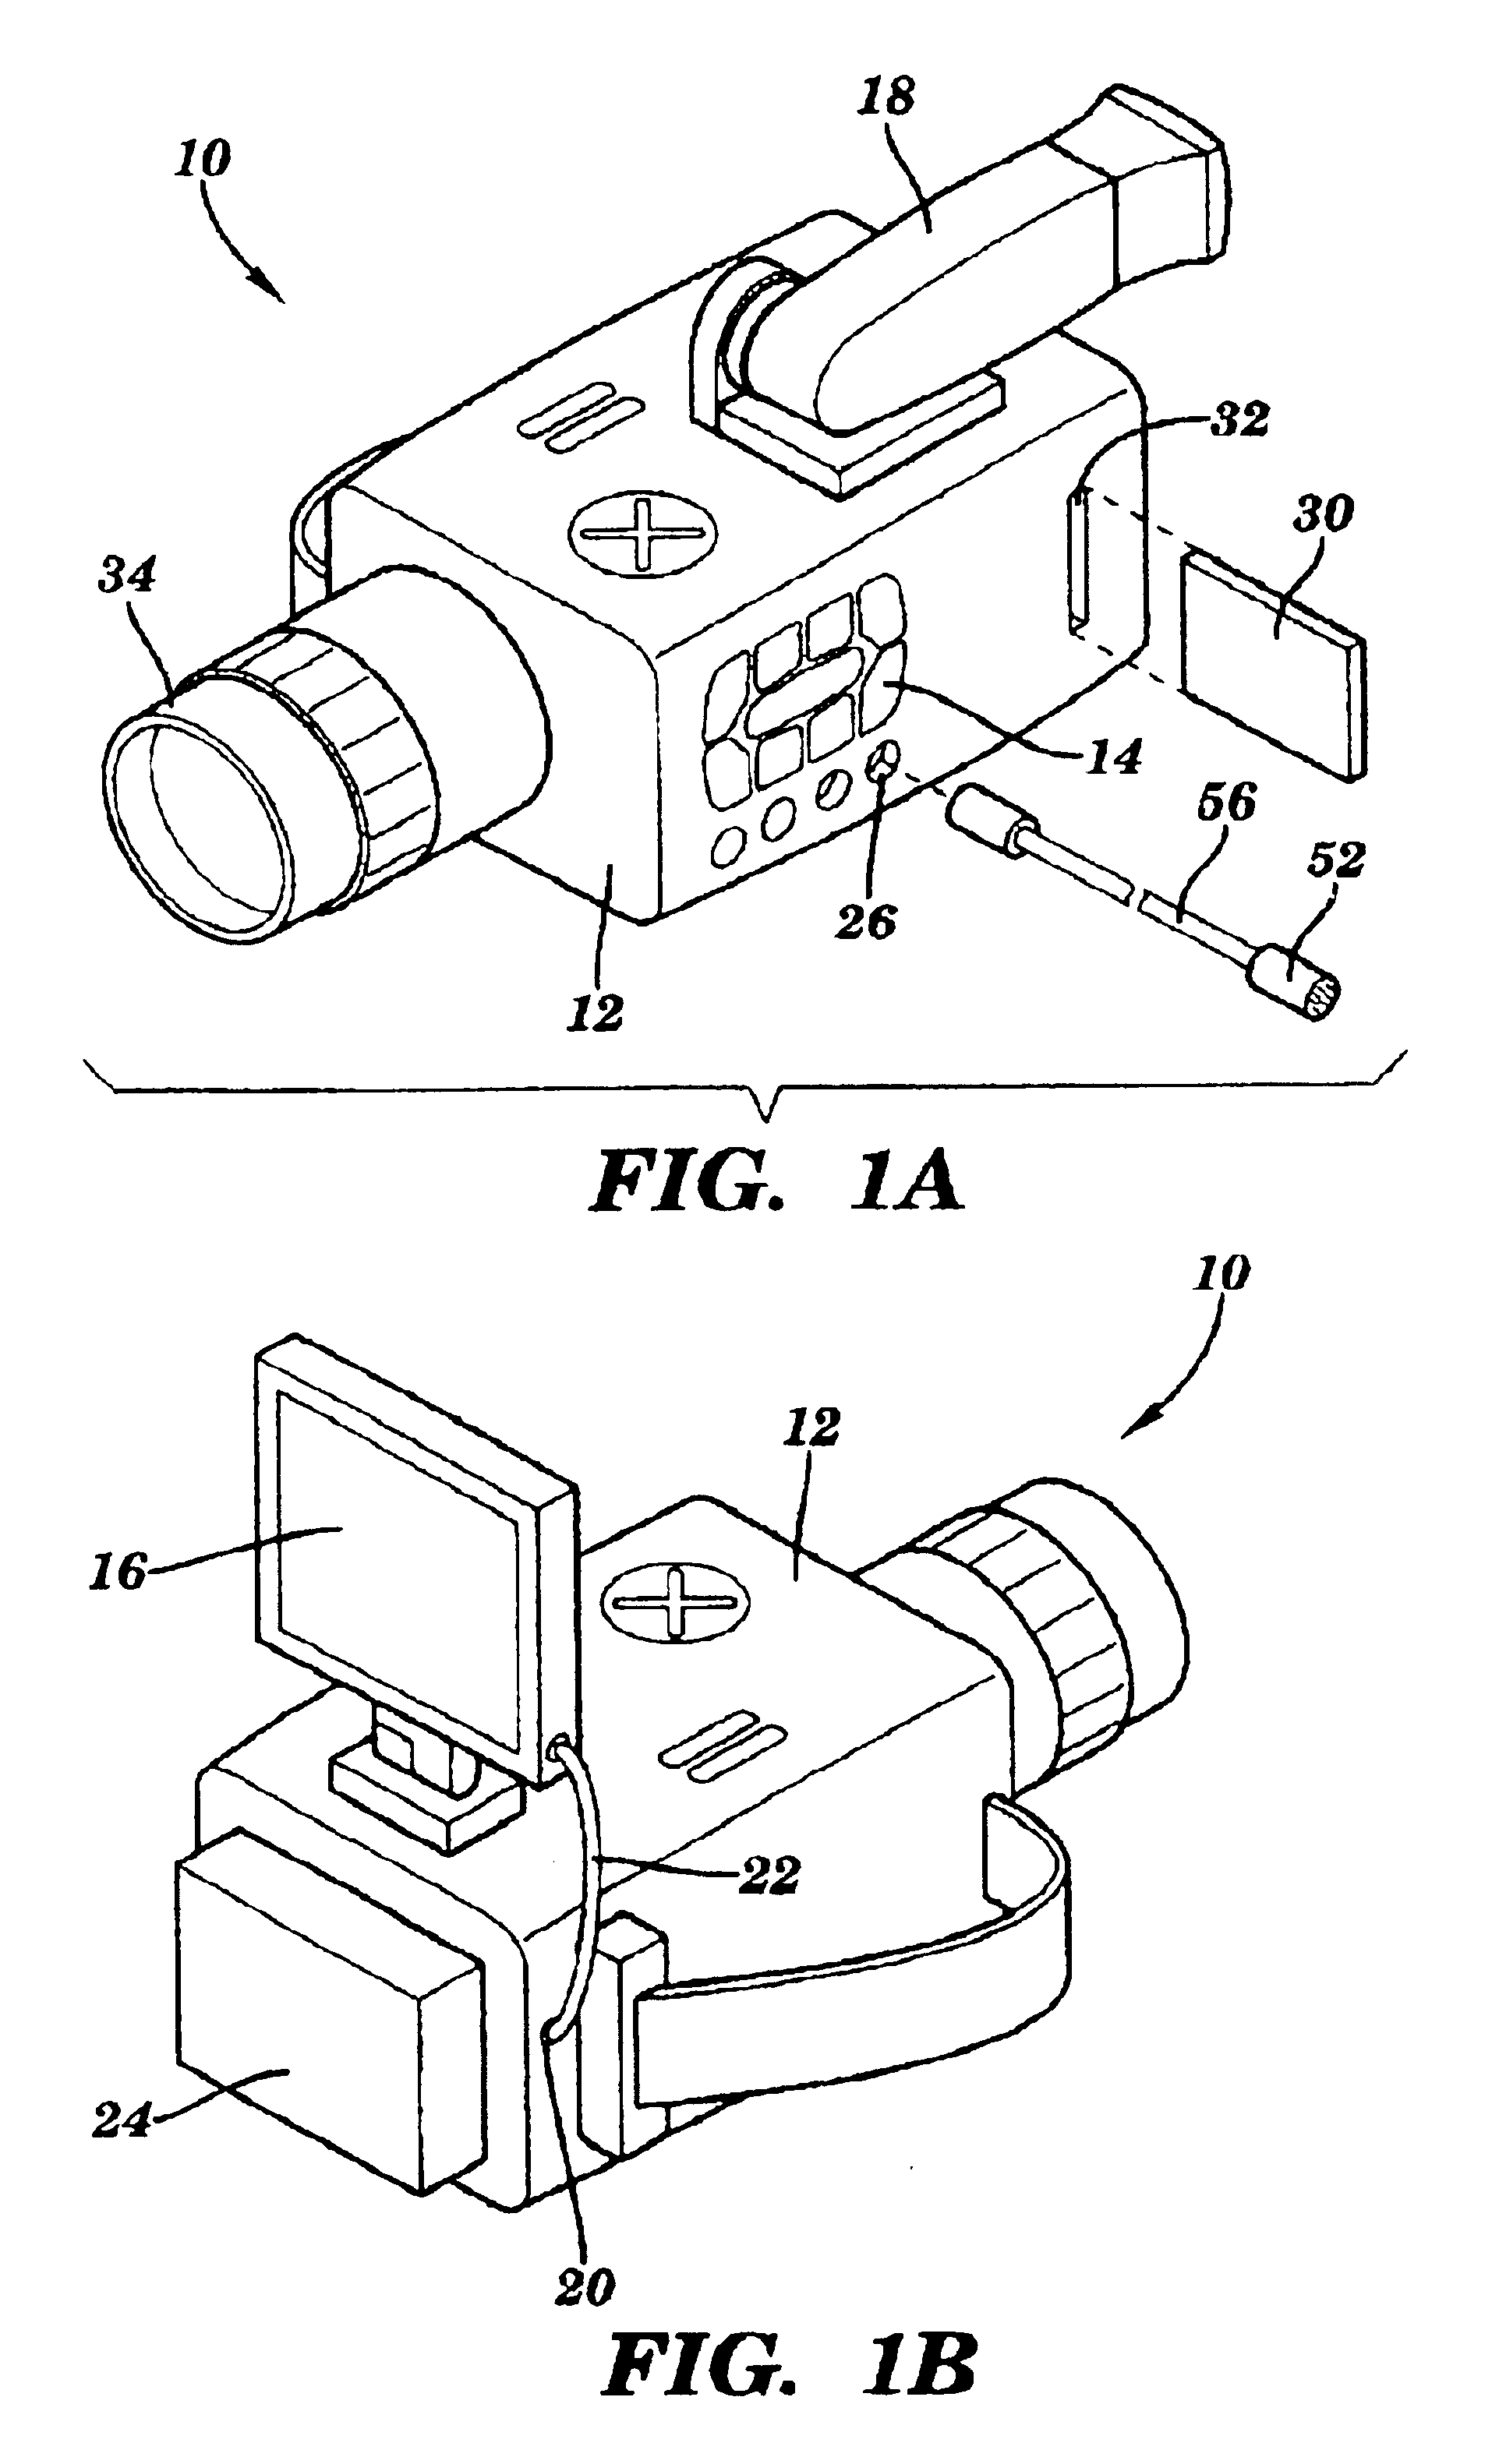 Method and apparatus for barcode selection of themographic survey images